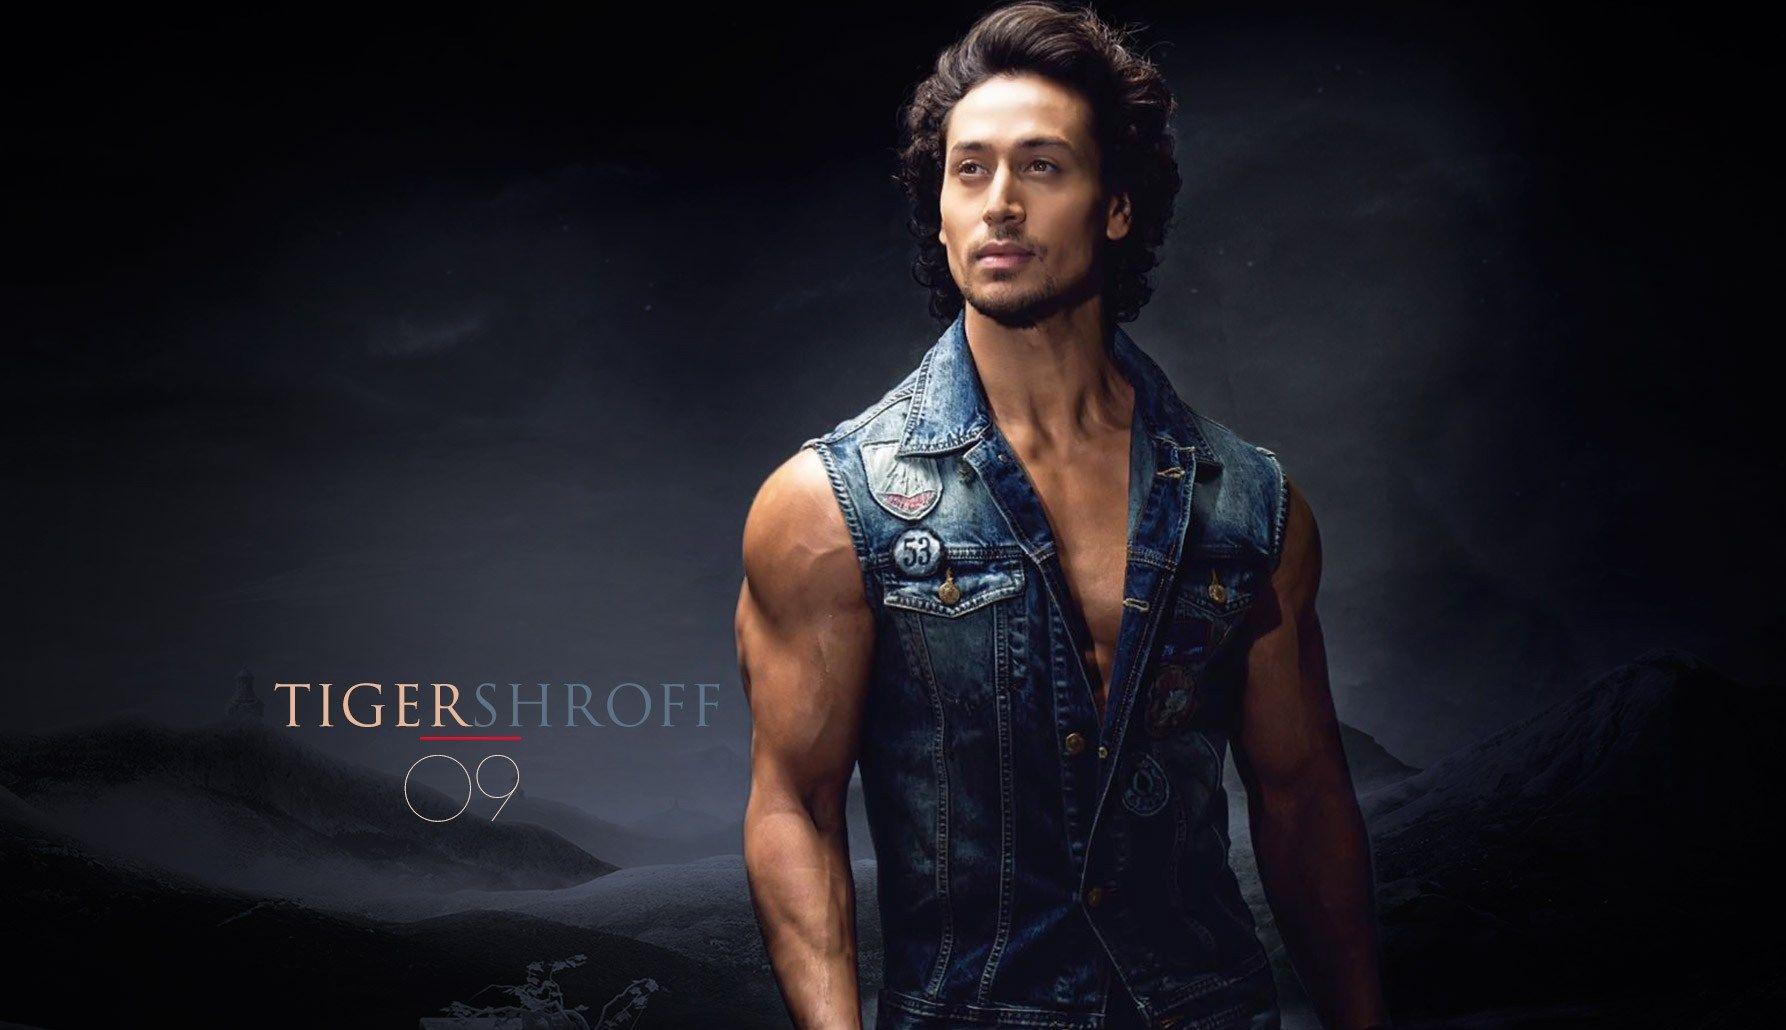 Tiger Shroff HD Wallpapers - Top Free Tiger Shroff HD Backgrounds ...